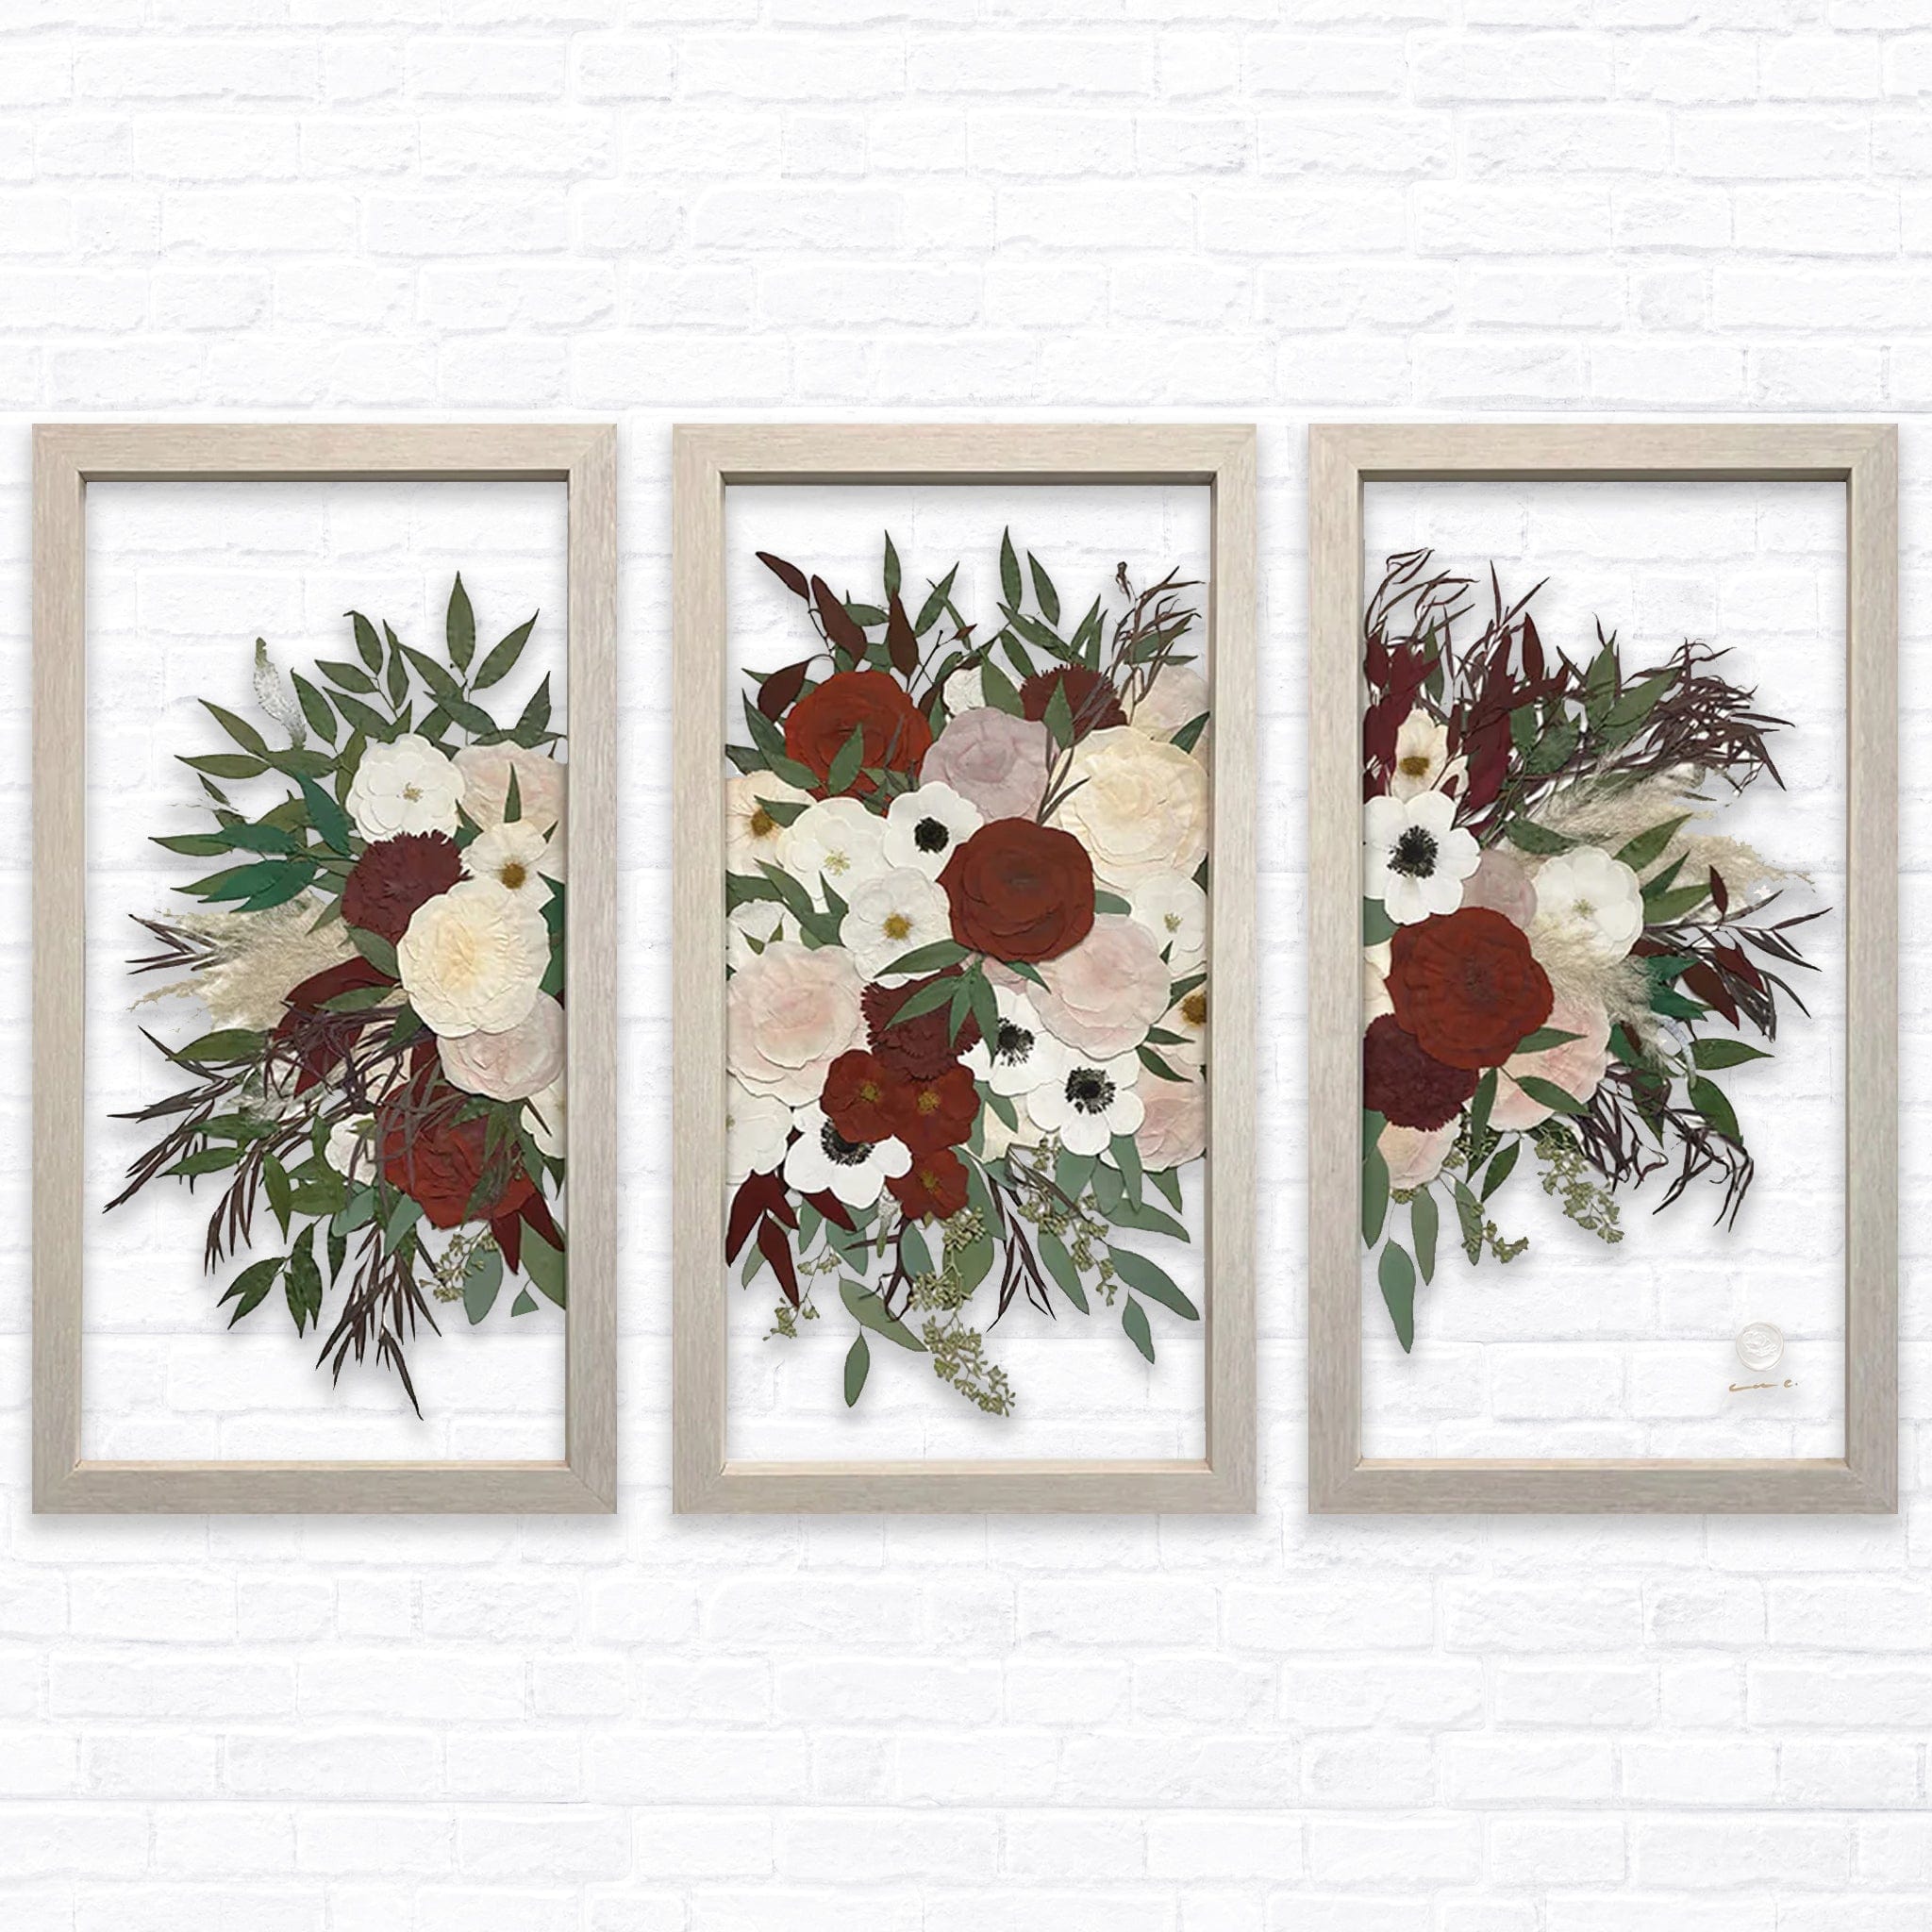 Designs by Andrea Pressed (Framed) Panel / 12" x 24" / Rectangle 12" x 24" Trio Panels Floating Frames